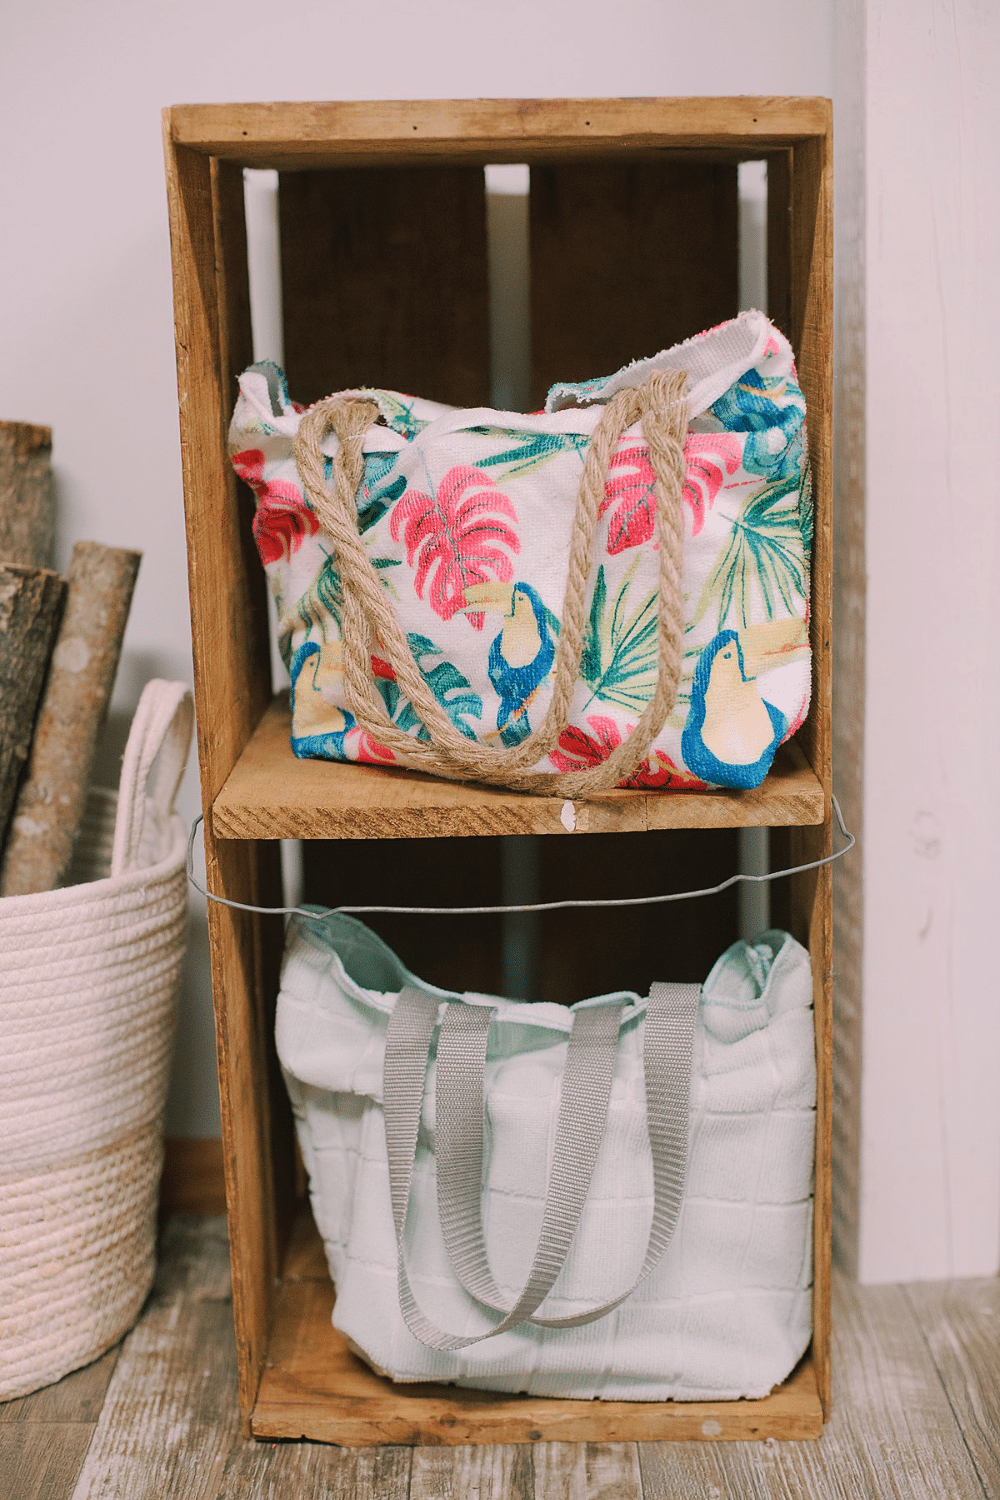 How to Make a Flat Bottom Tote Bag Out of Hand Towels